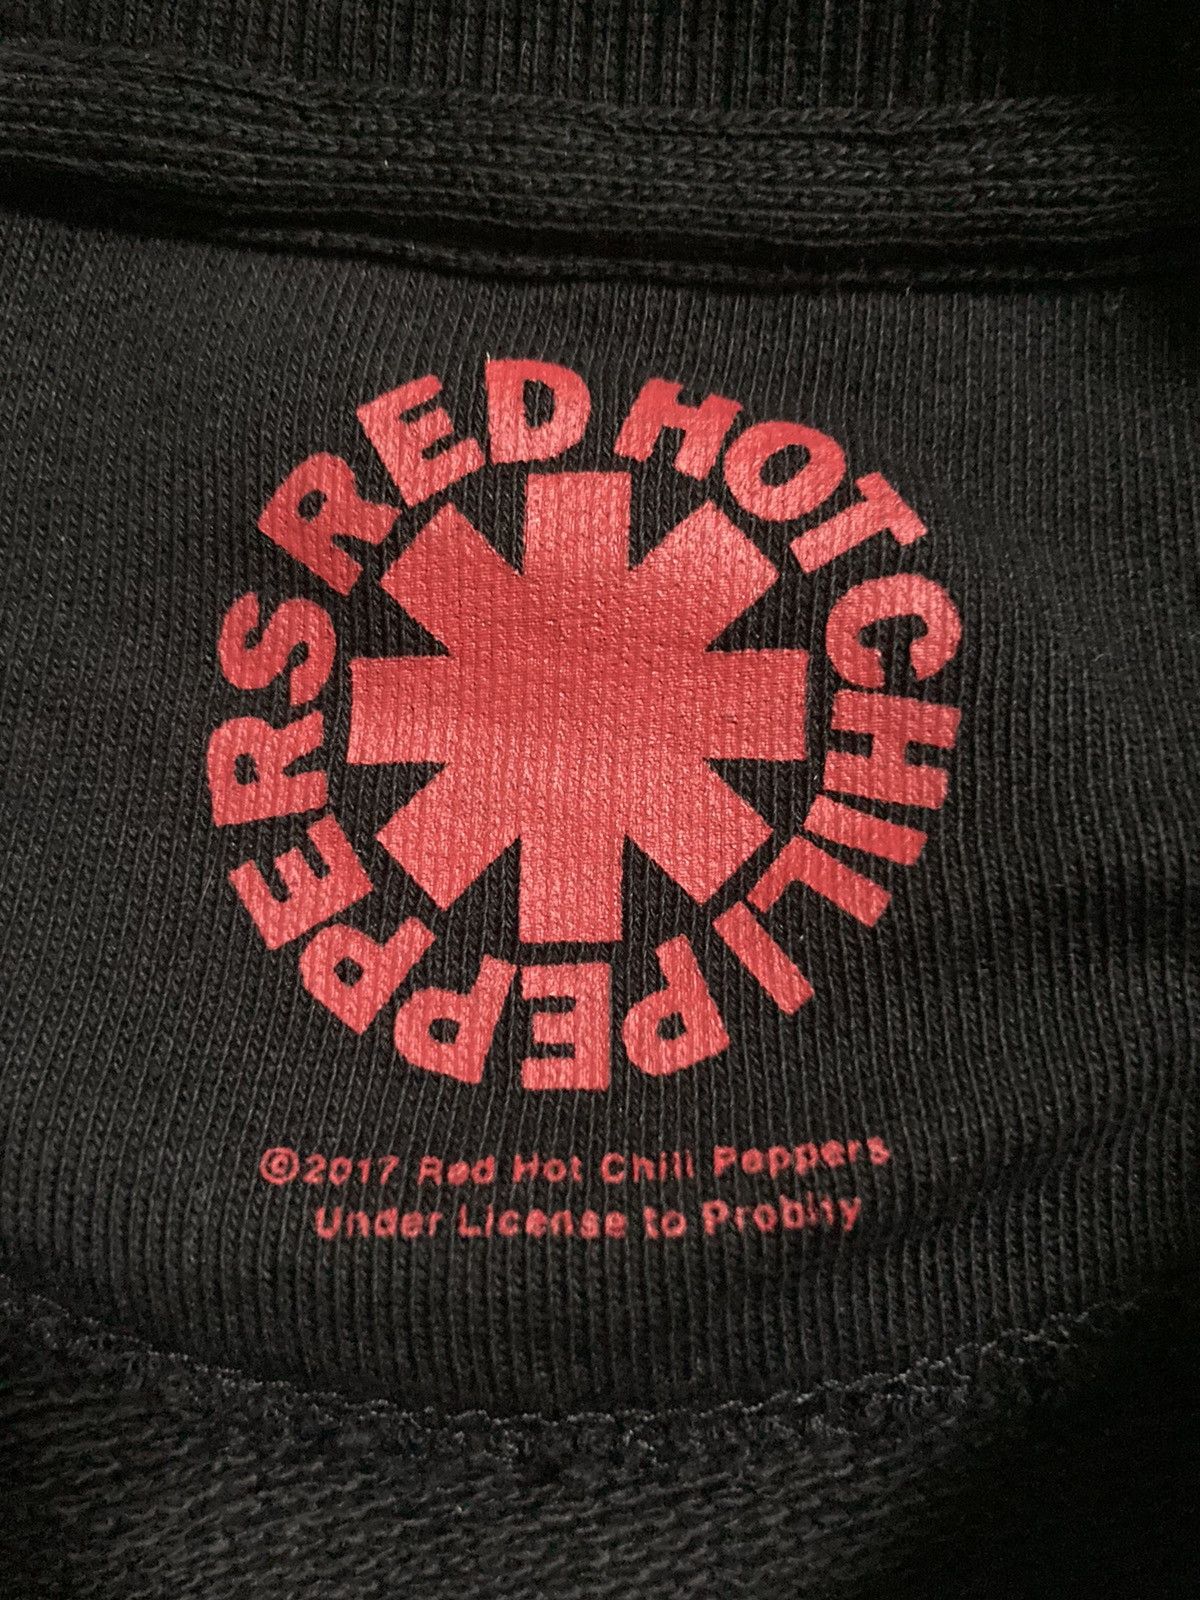 Vintage - Red Hot Chili Peppers x Gu - 4